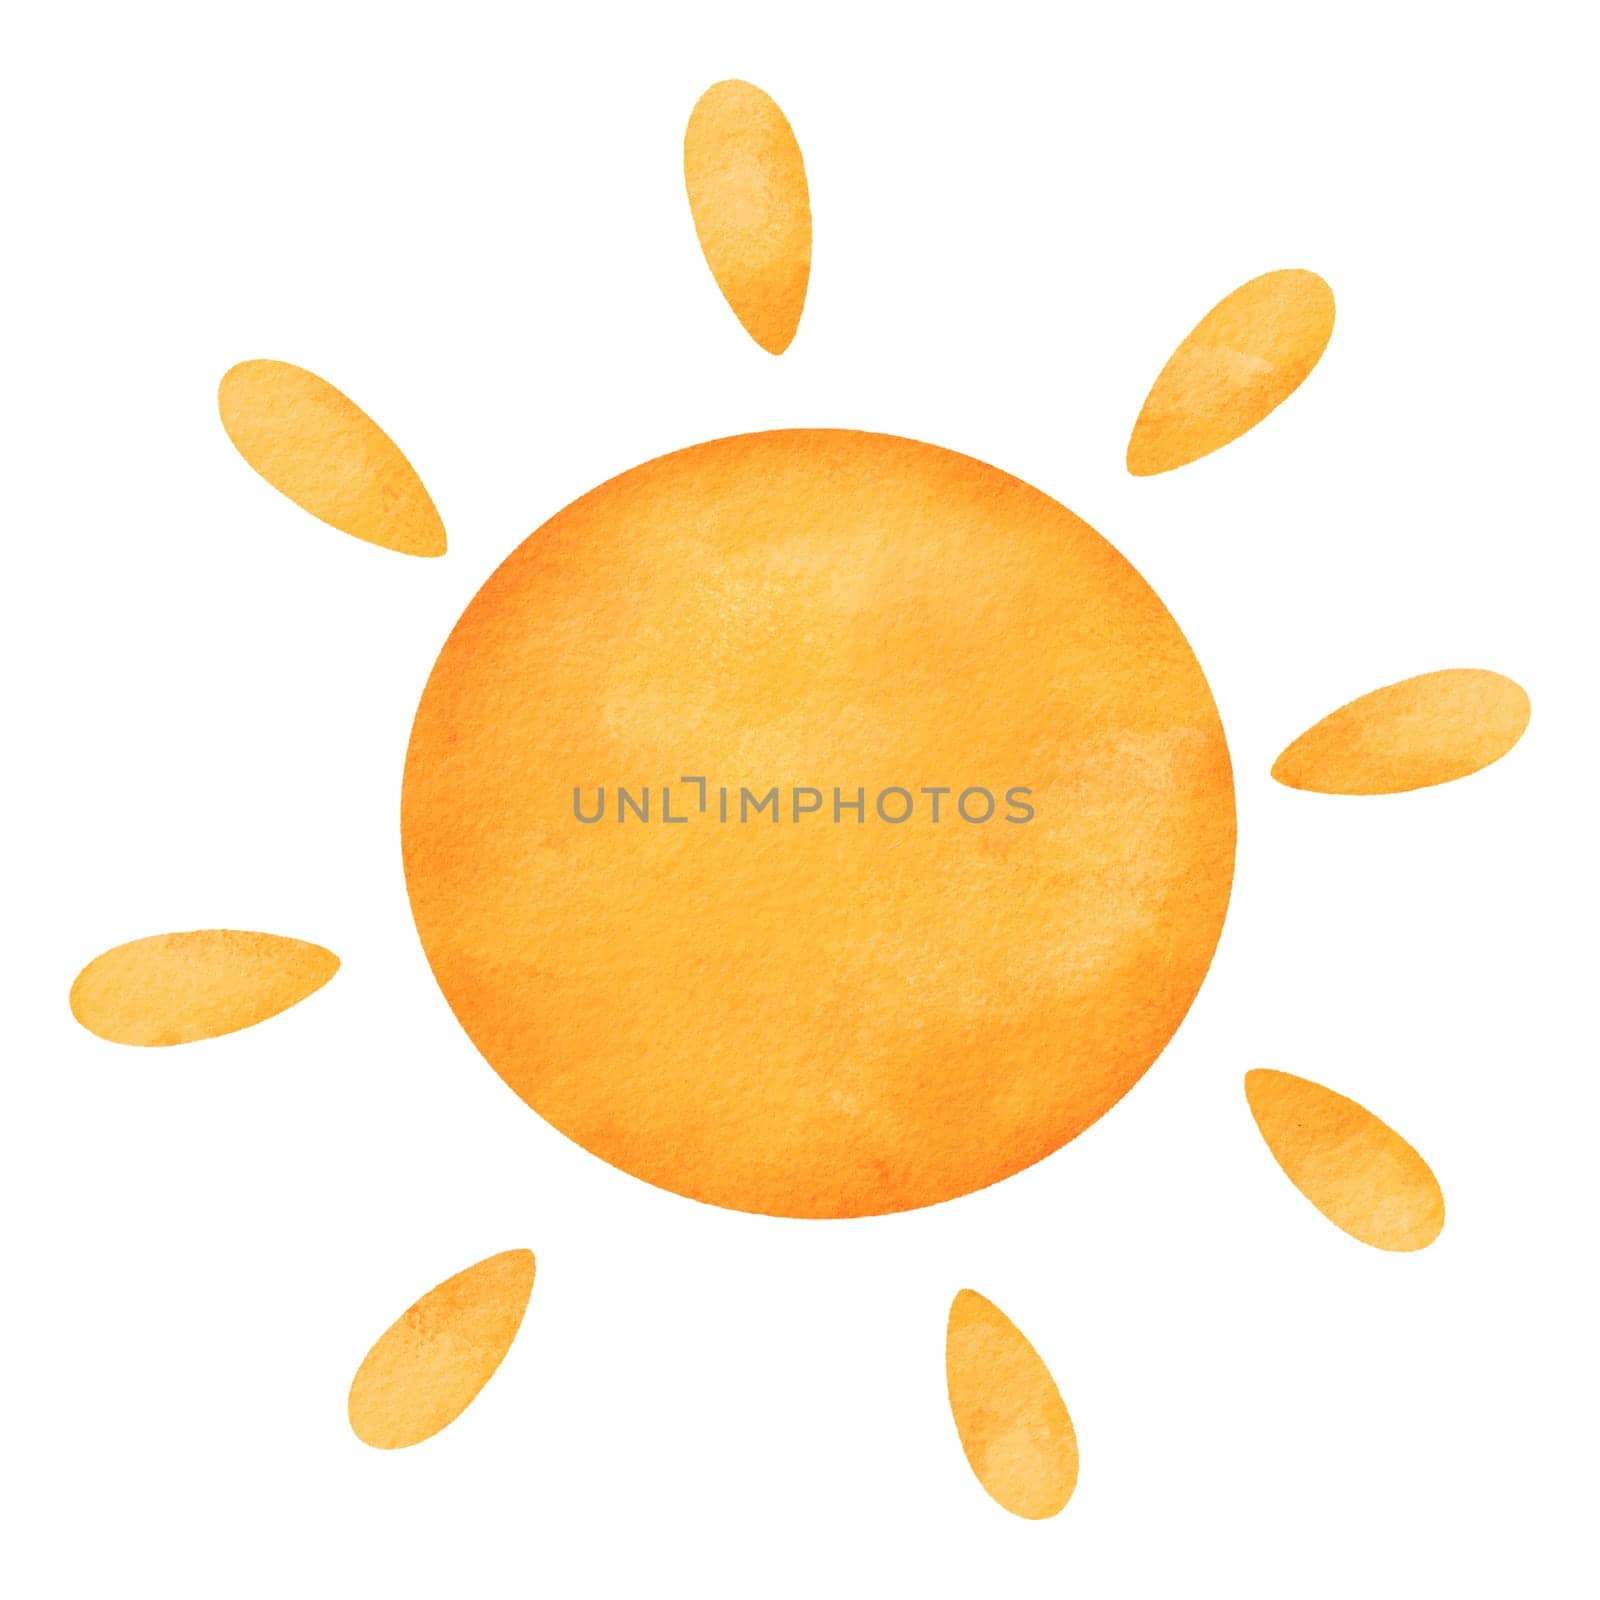 sun with rays. for children's books, greeting cards, and vibrant illustrations. Let the sun's lively character shine through in your creative projects. watercolor illustration in a cartoon style by Art_Mari_Ka